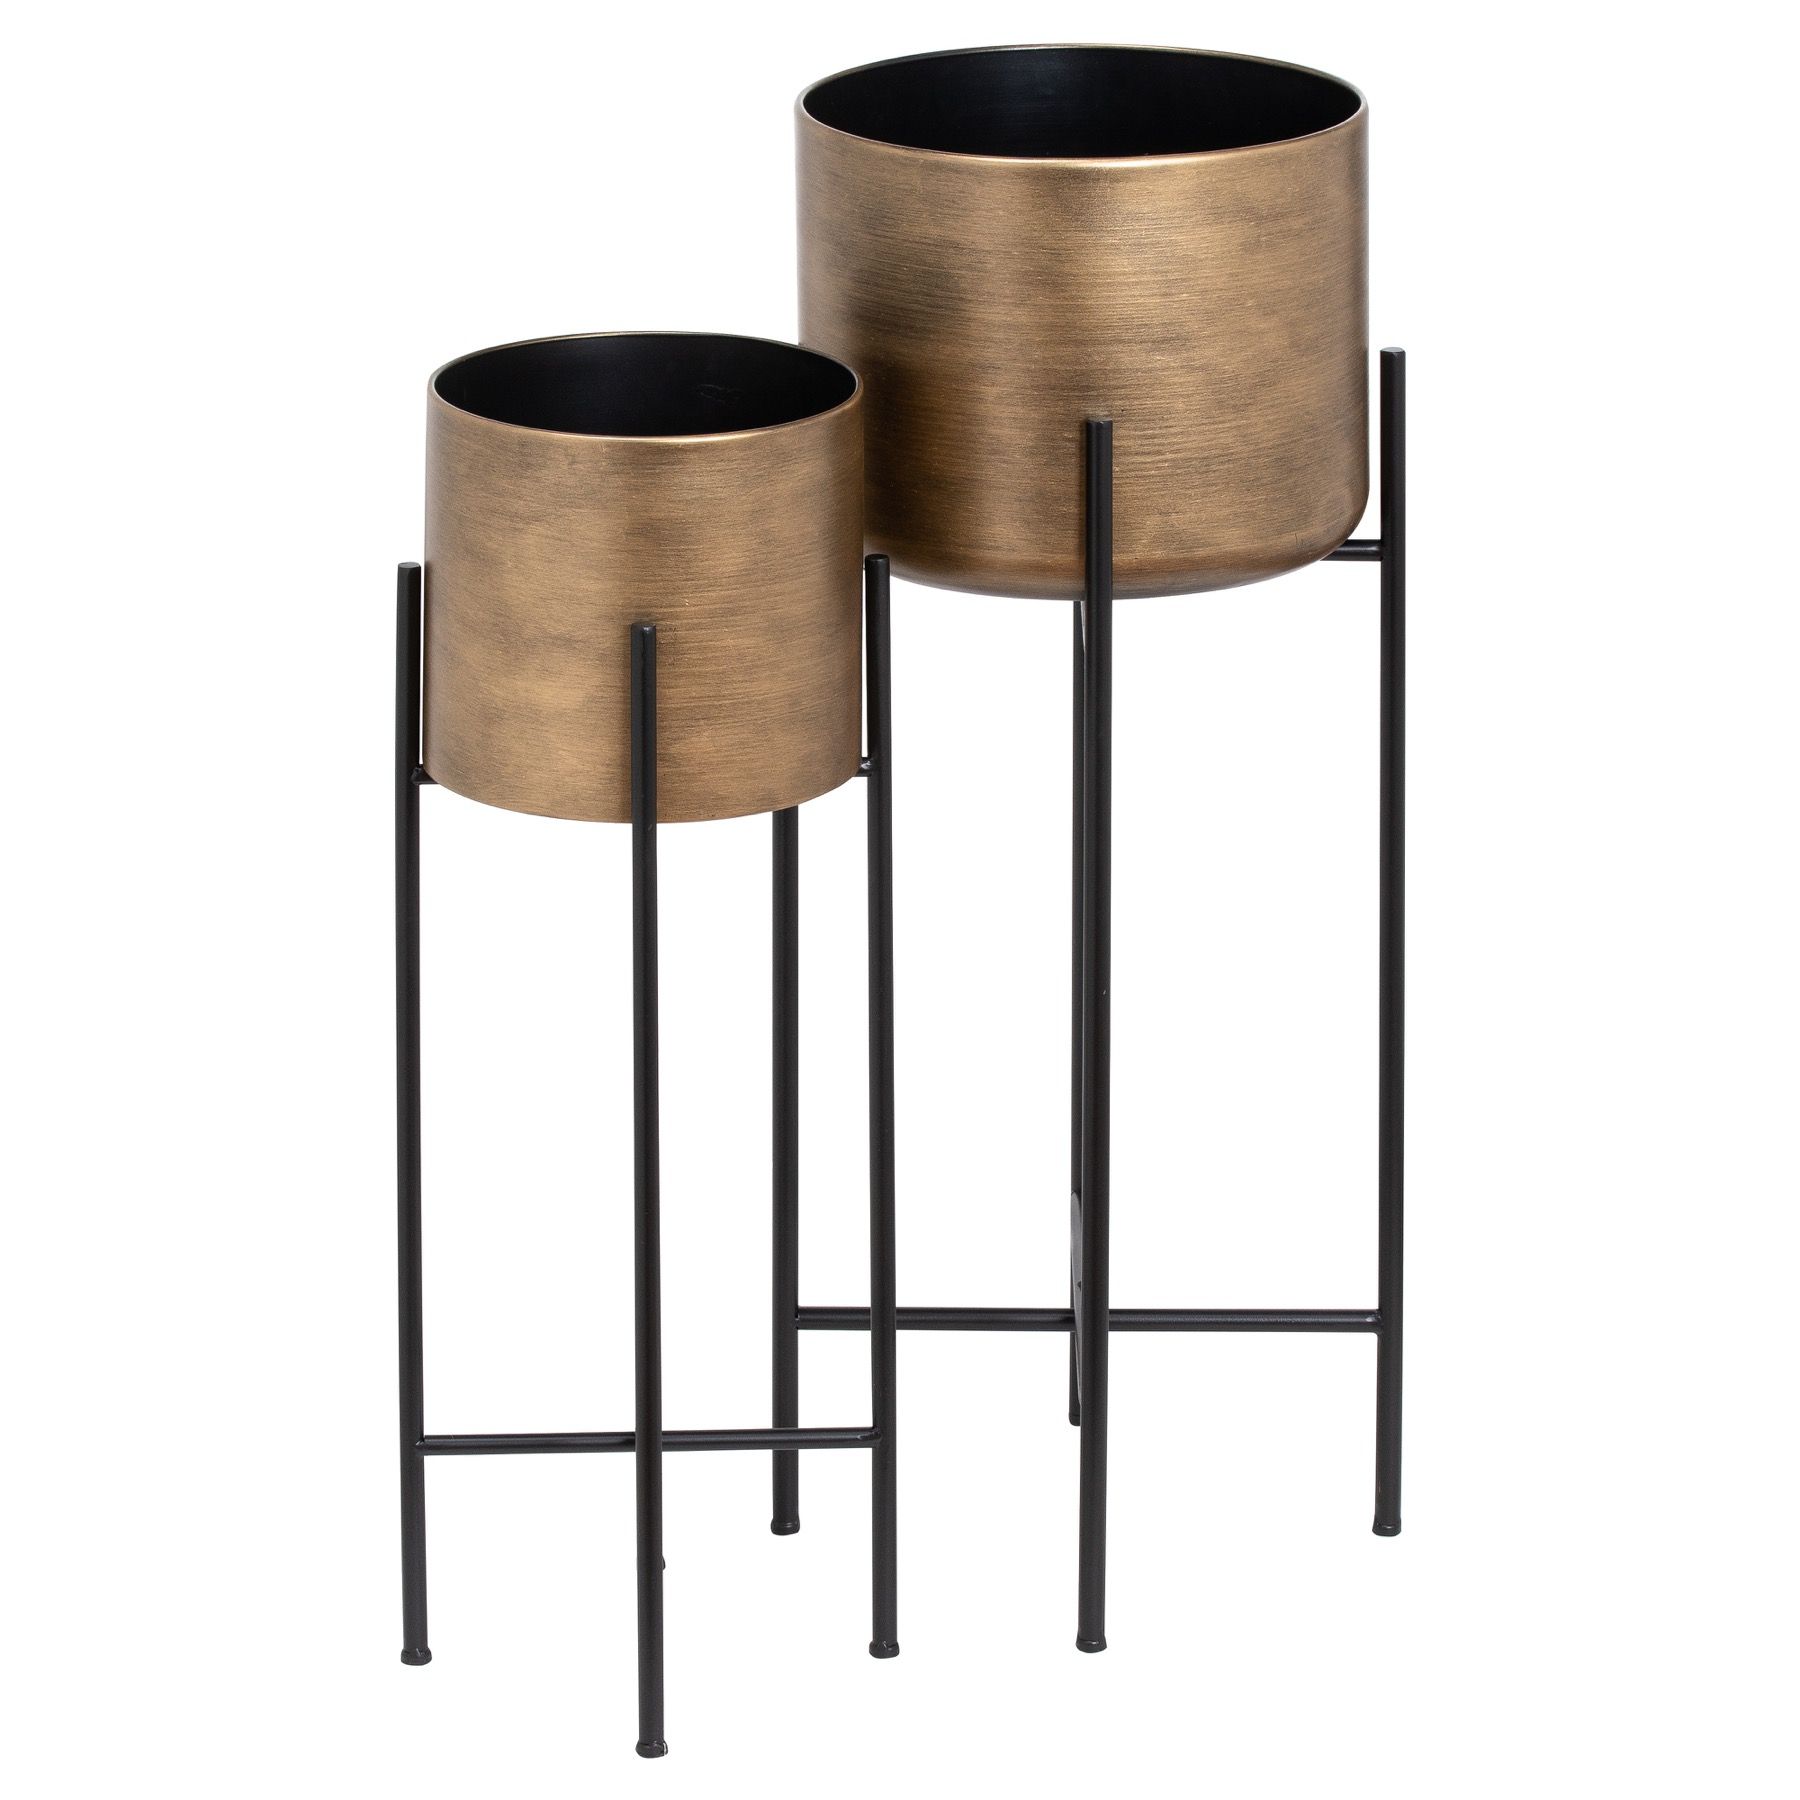 Set Of Two Bronze Planters On Stand | Wholesalehill Interiors With Bronze Small Plant Stands (View 4 of 15)